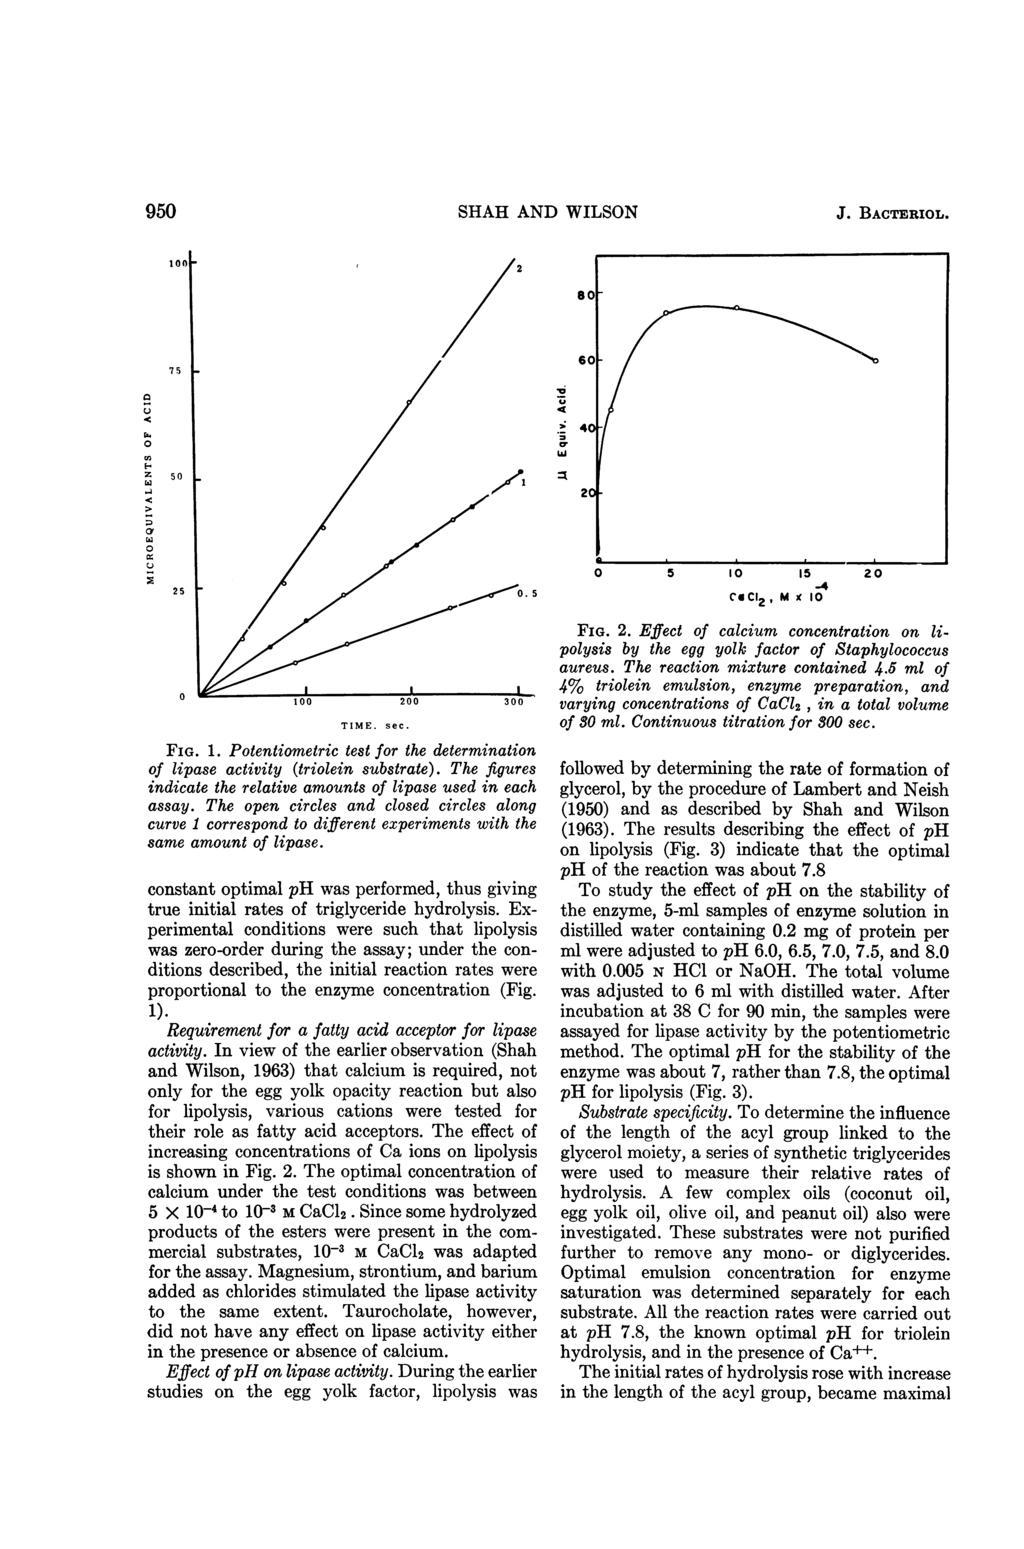 95 SHAH AND WILSON J. BACTERIOL. 2; 4 z 5 25 1 2 3 TIME. sec. FIG. 1. Potentiometric test for the determination of lipase activity (triolein substrate).